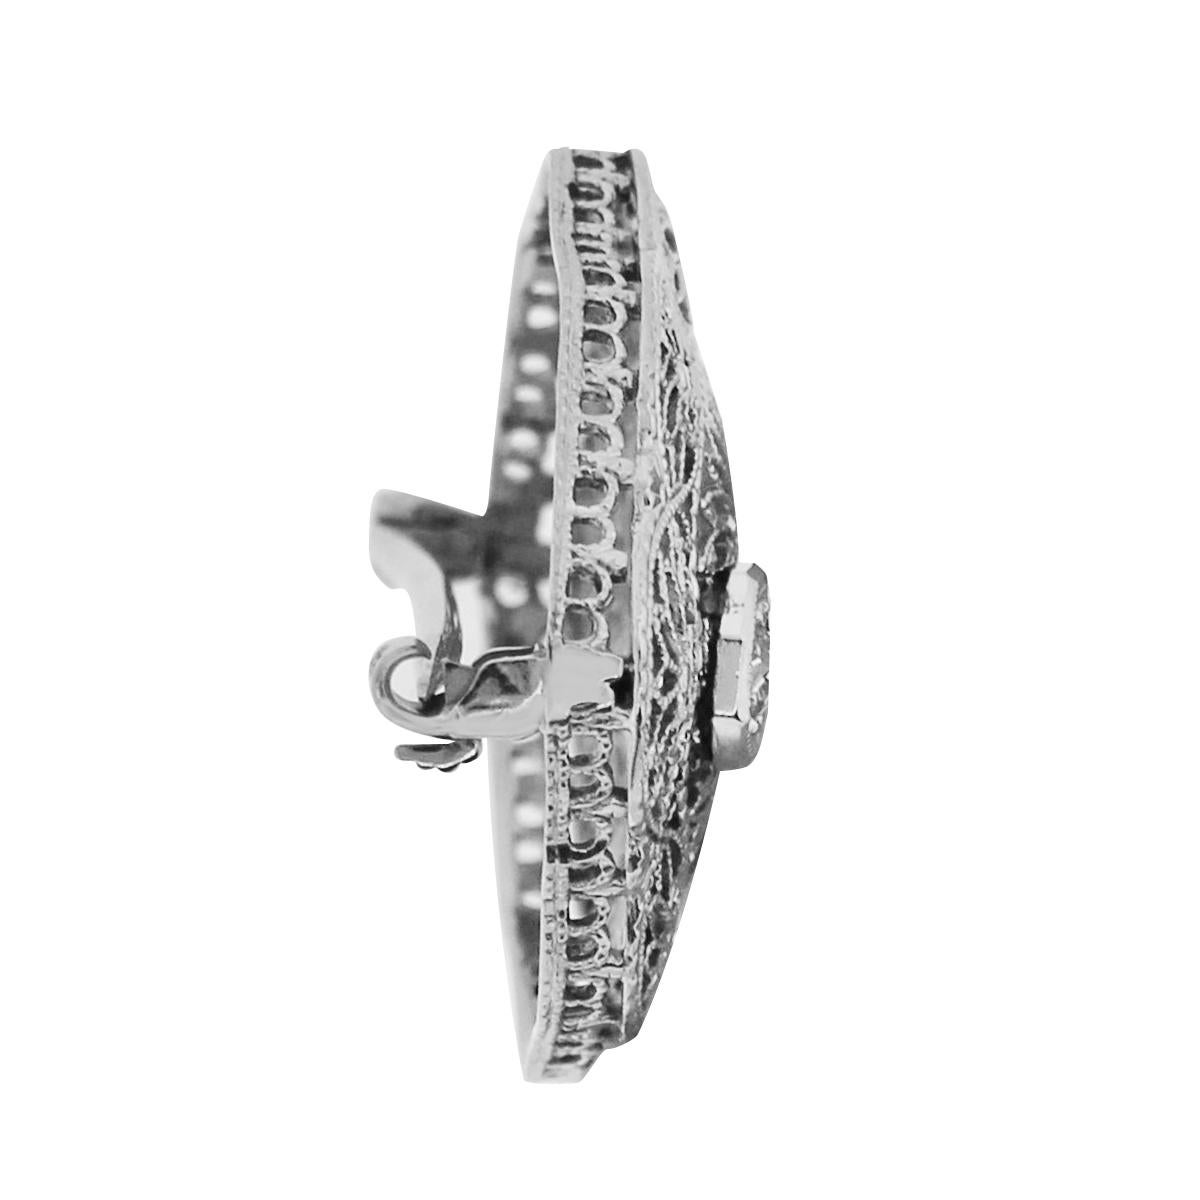 Material: 14k White Gold
Diamond Details: Approximately 1.10ctw round brilliant diamonds. Diamonds are G/H in color and SI in clarity.
Measurements: 0.93″ x 0.32″ x 1.30″
Total Weight: 4.4g (2.8dwt)
SKU: G9405